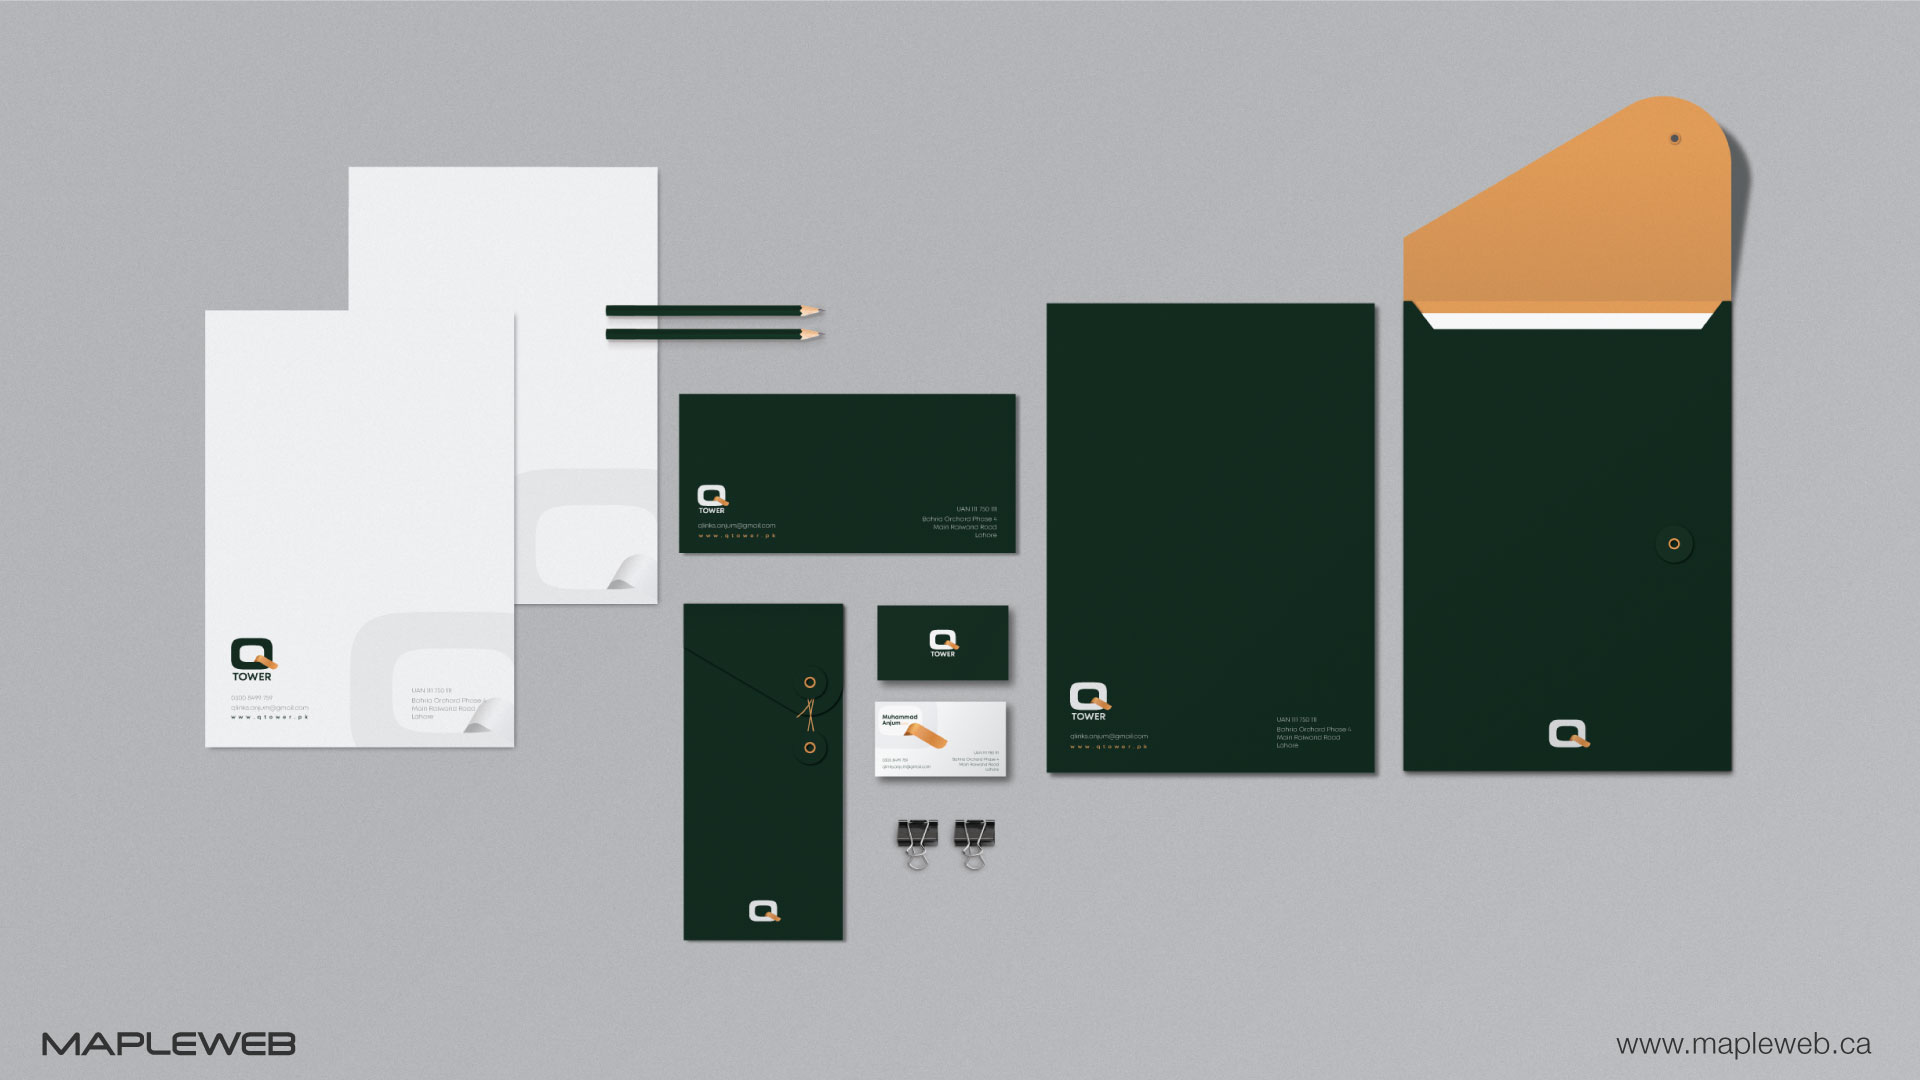 q-tower-brand-logo-design-by-mapleweb-vancouver-canada-green-folder-and-white-paper-mock